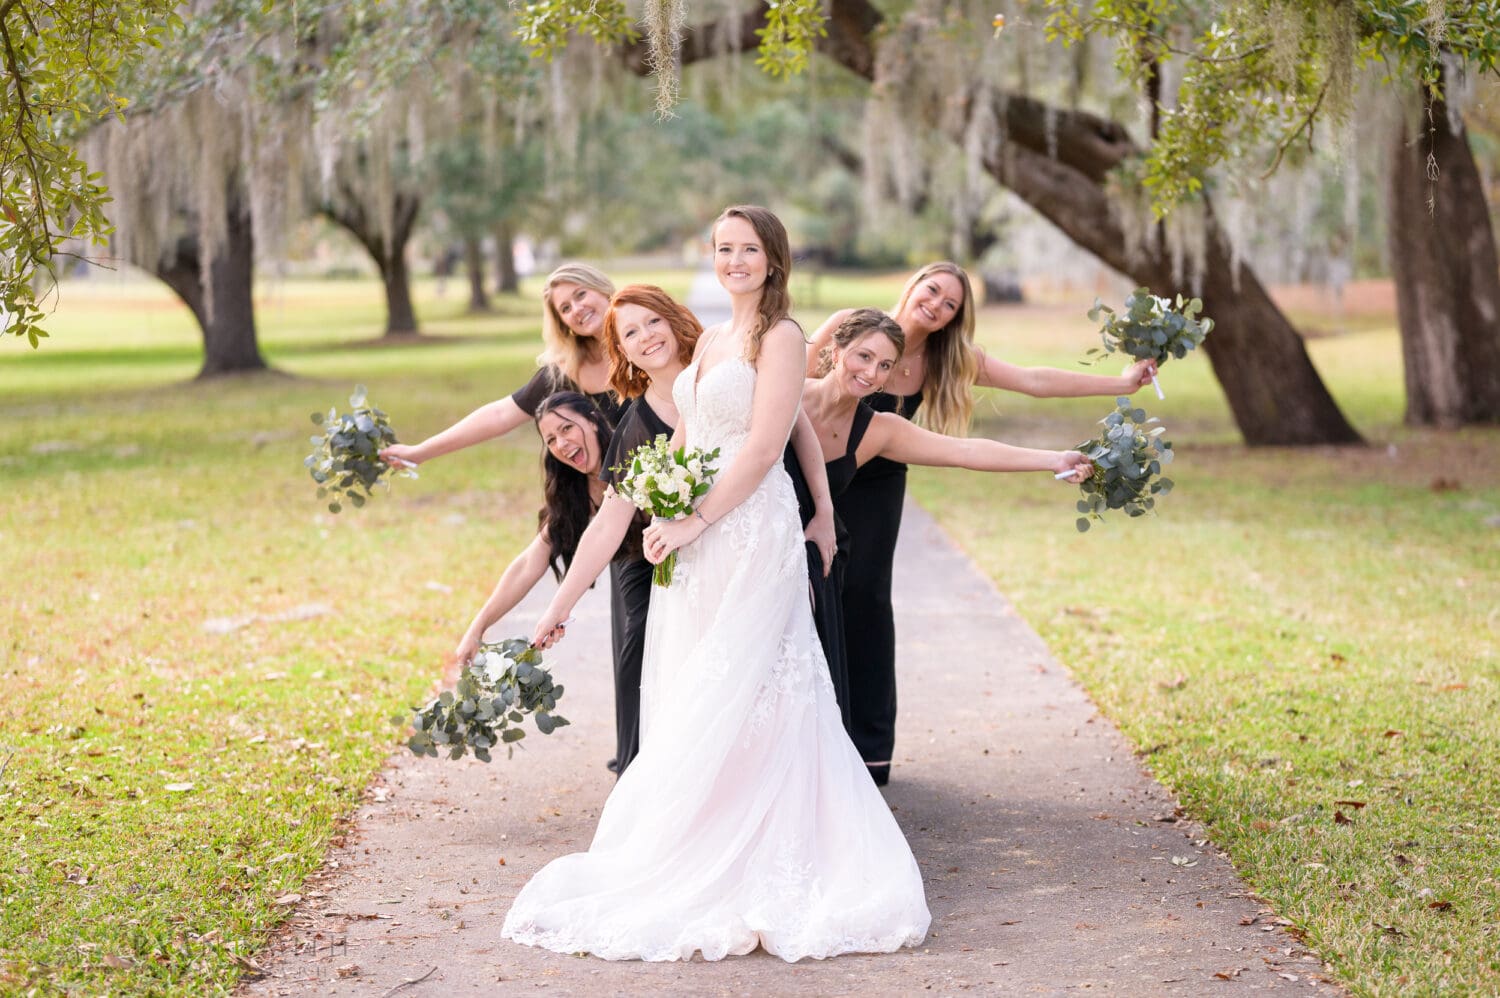 Bridesmaids leaning out from behind the bride - Brookgreen Gardens